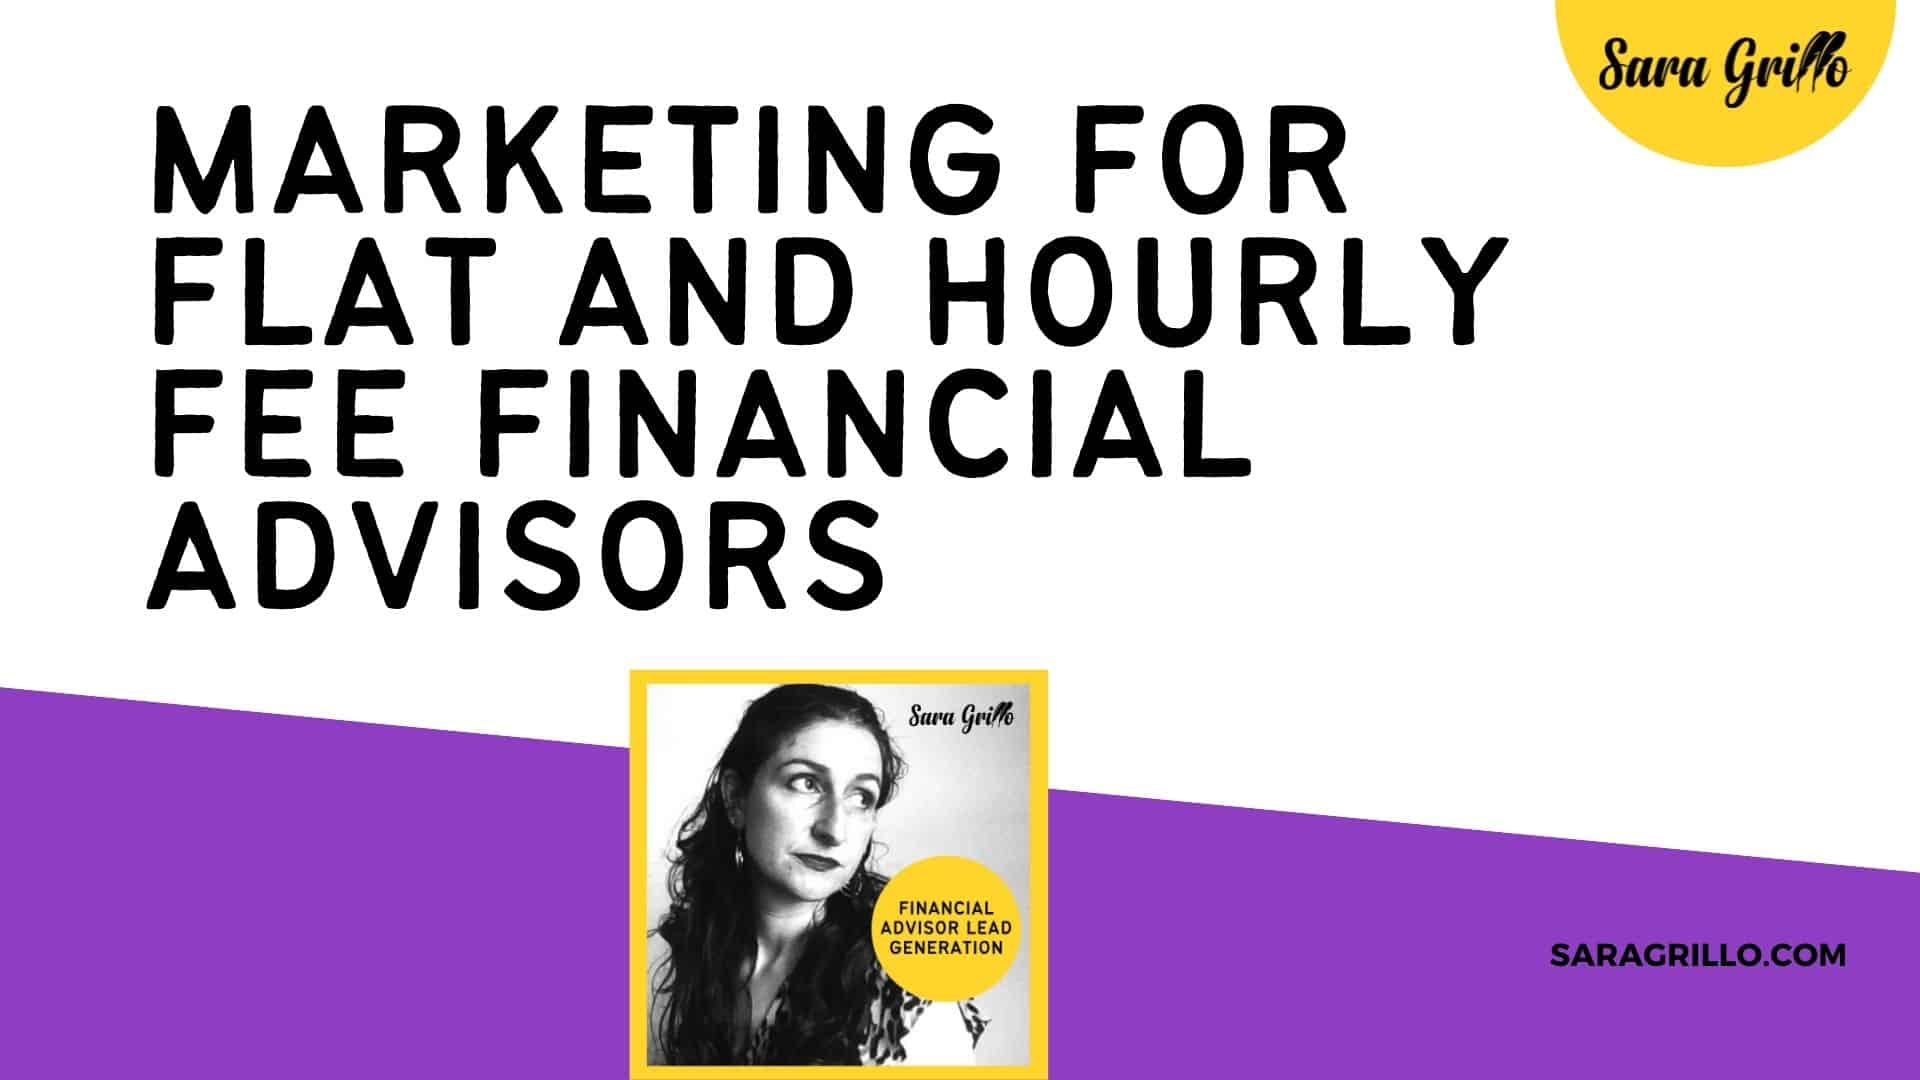 This is a resource page to support marketing for flat and hourly fee financial advisors.